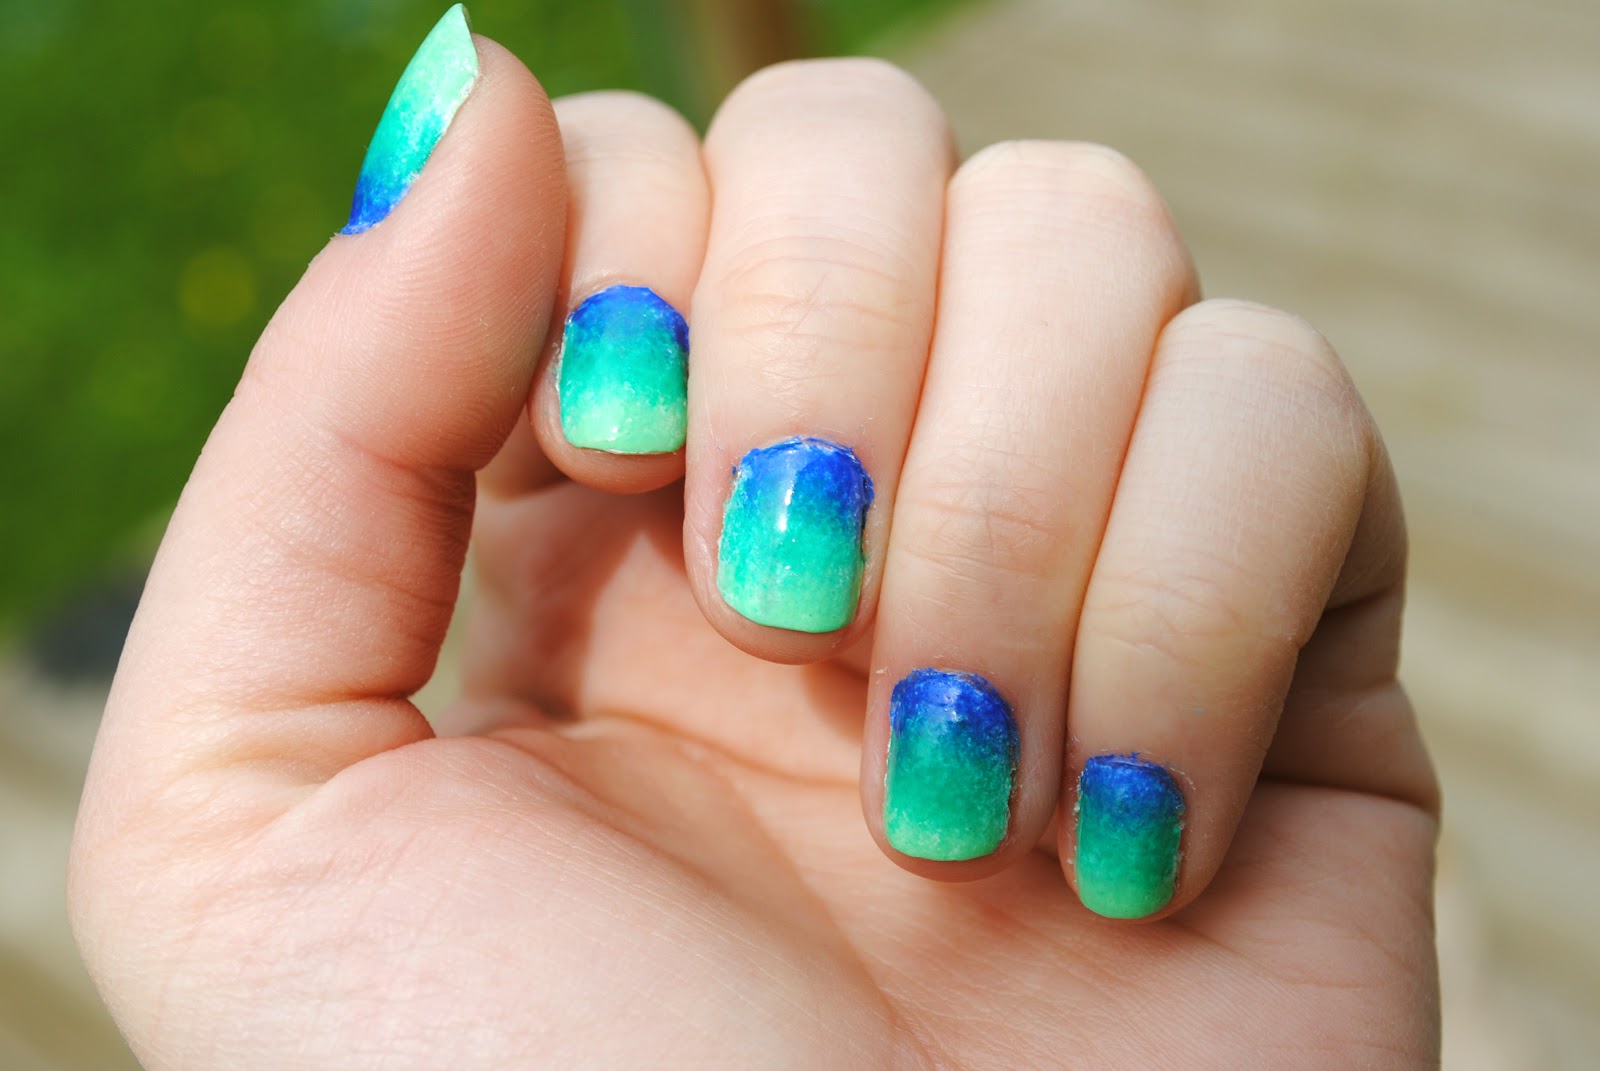 6. Ombre Nail Polish - wide 1